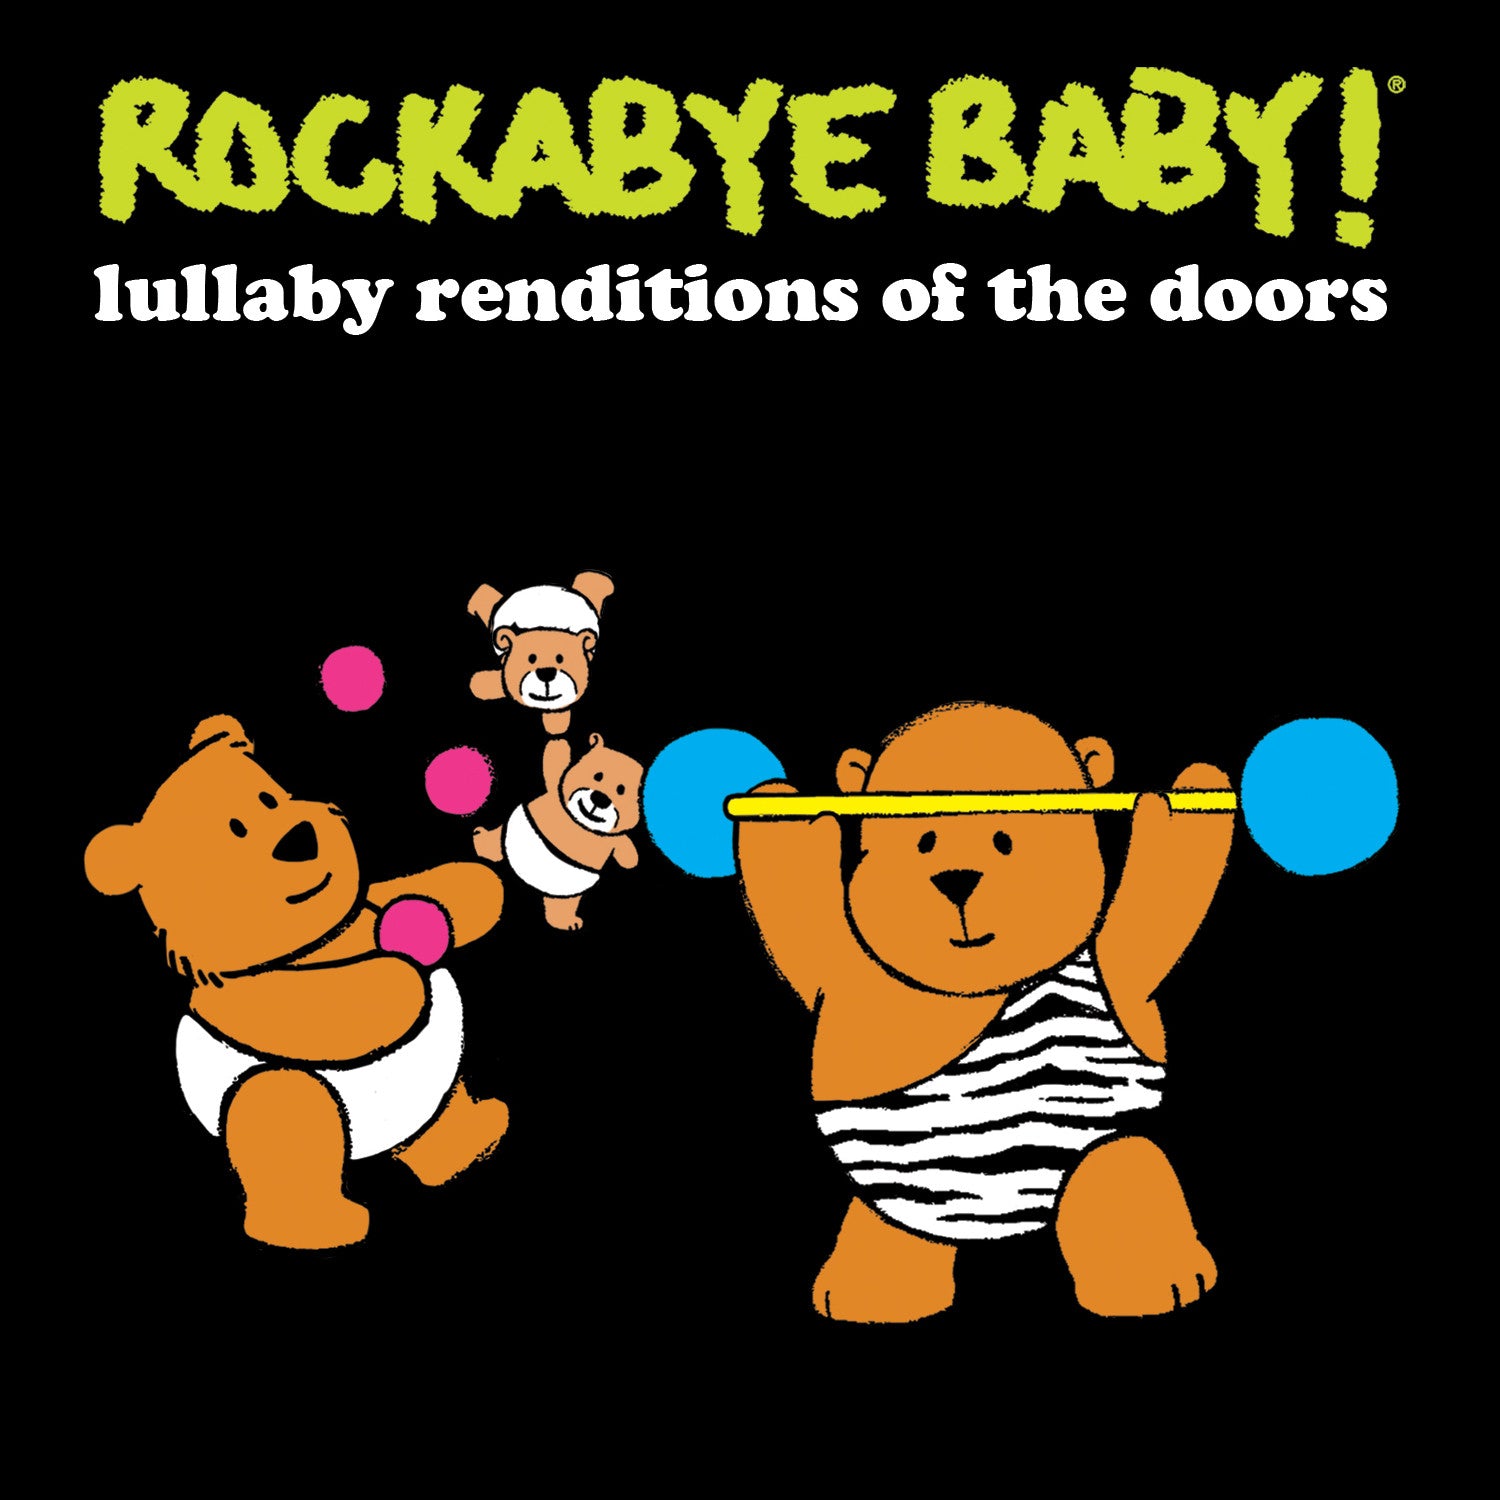 PRESS FOR LULLABY RENDITIONS OF THE DOORS